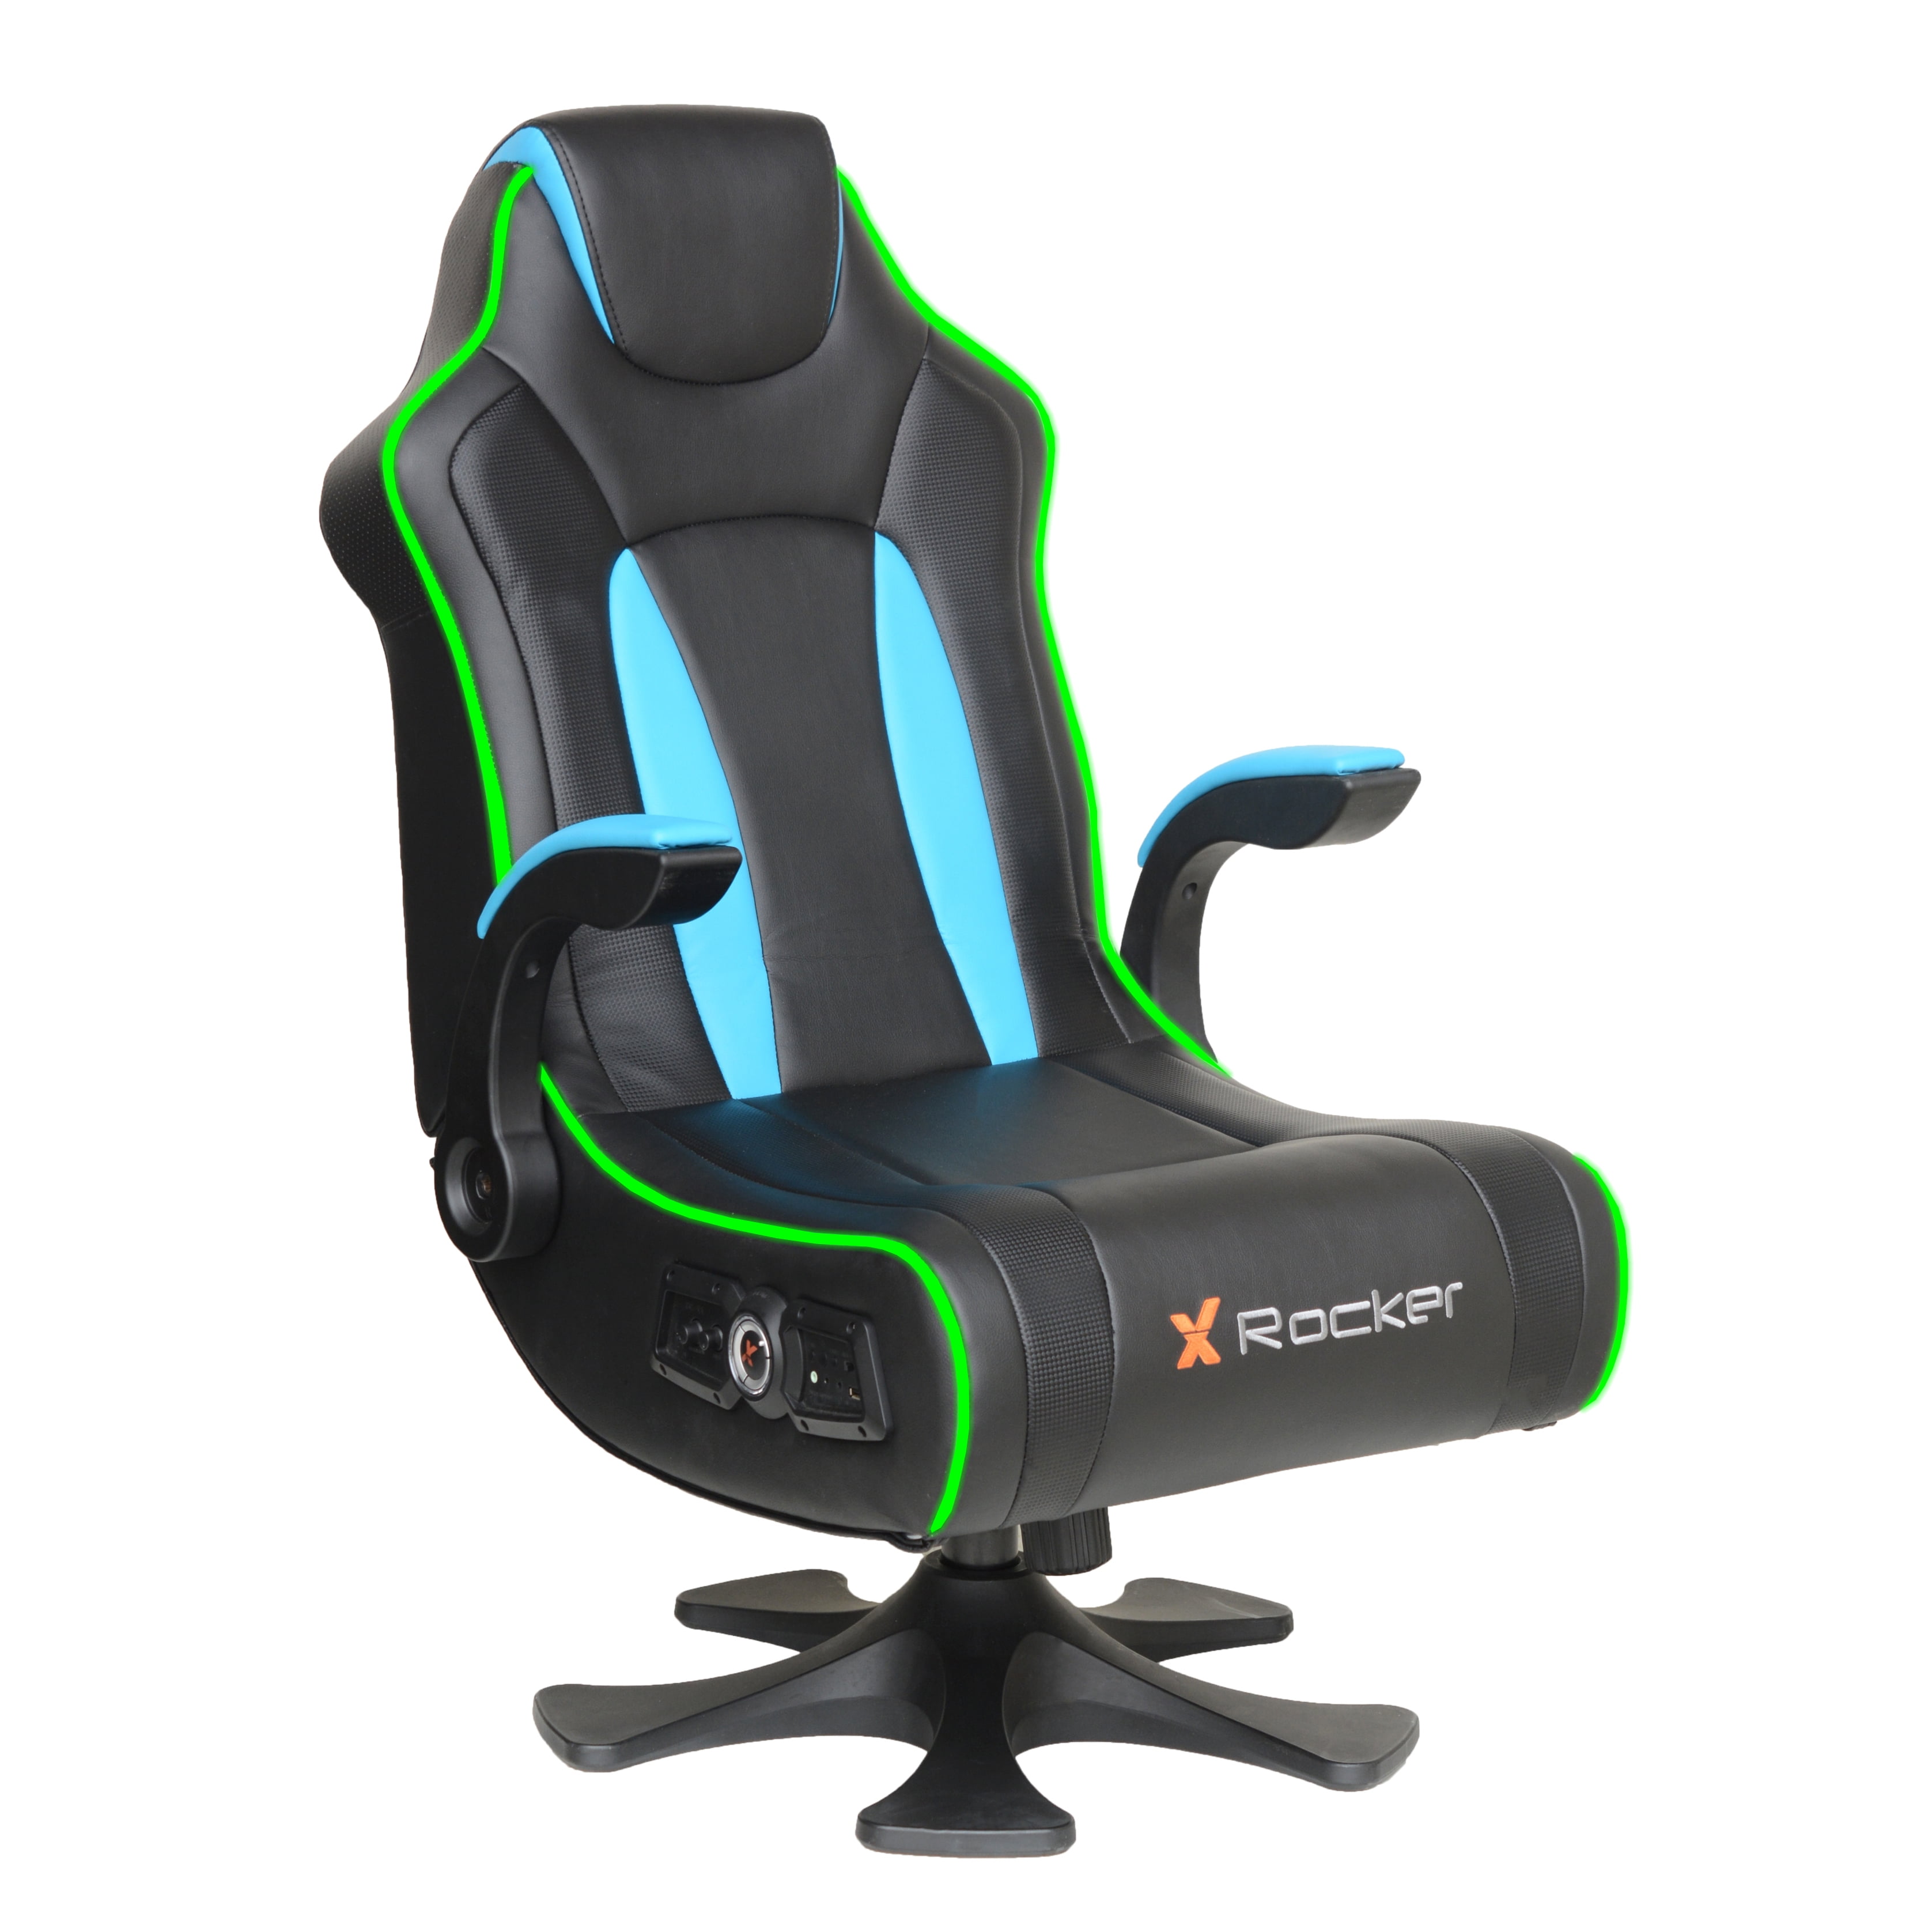 Minimalist Gaming Chair Walmart Rocker for Small Space